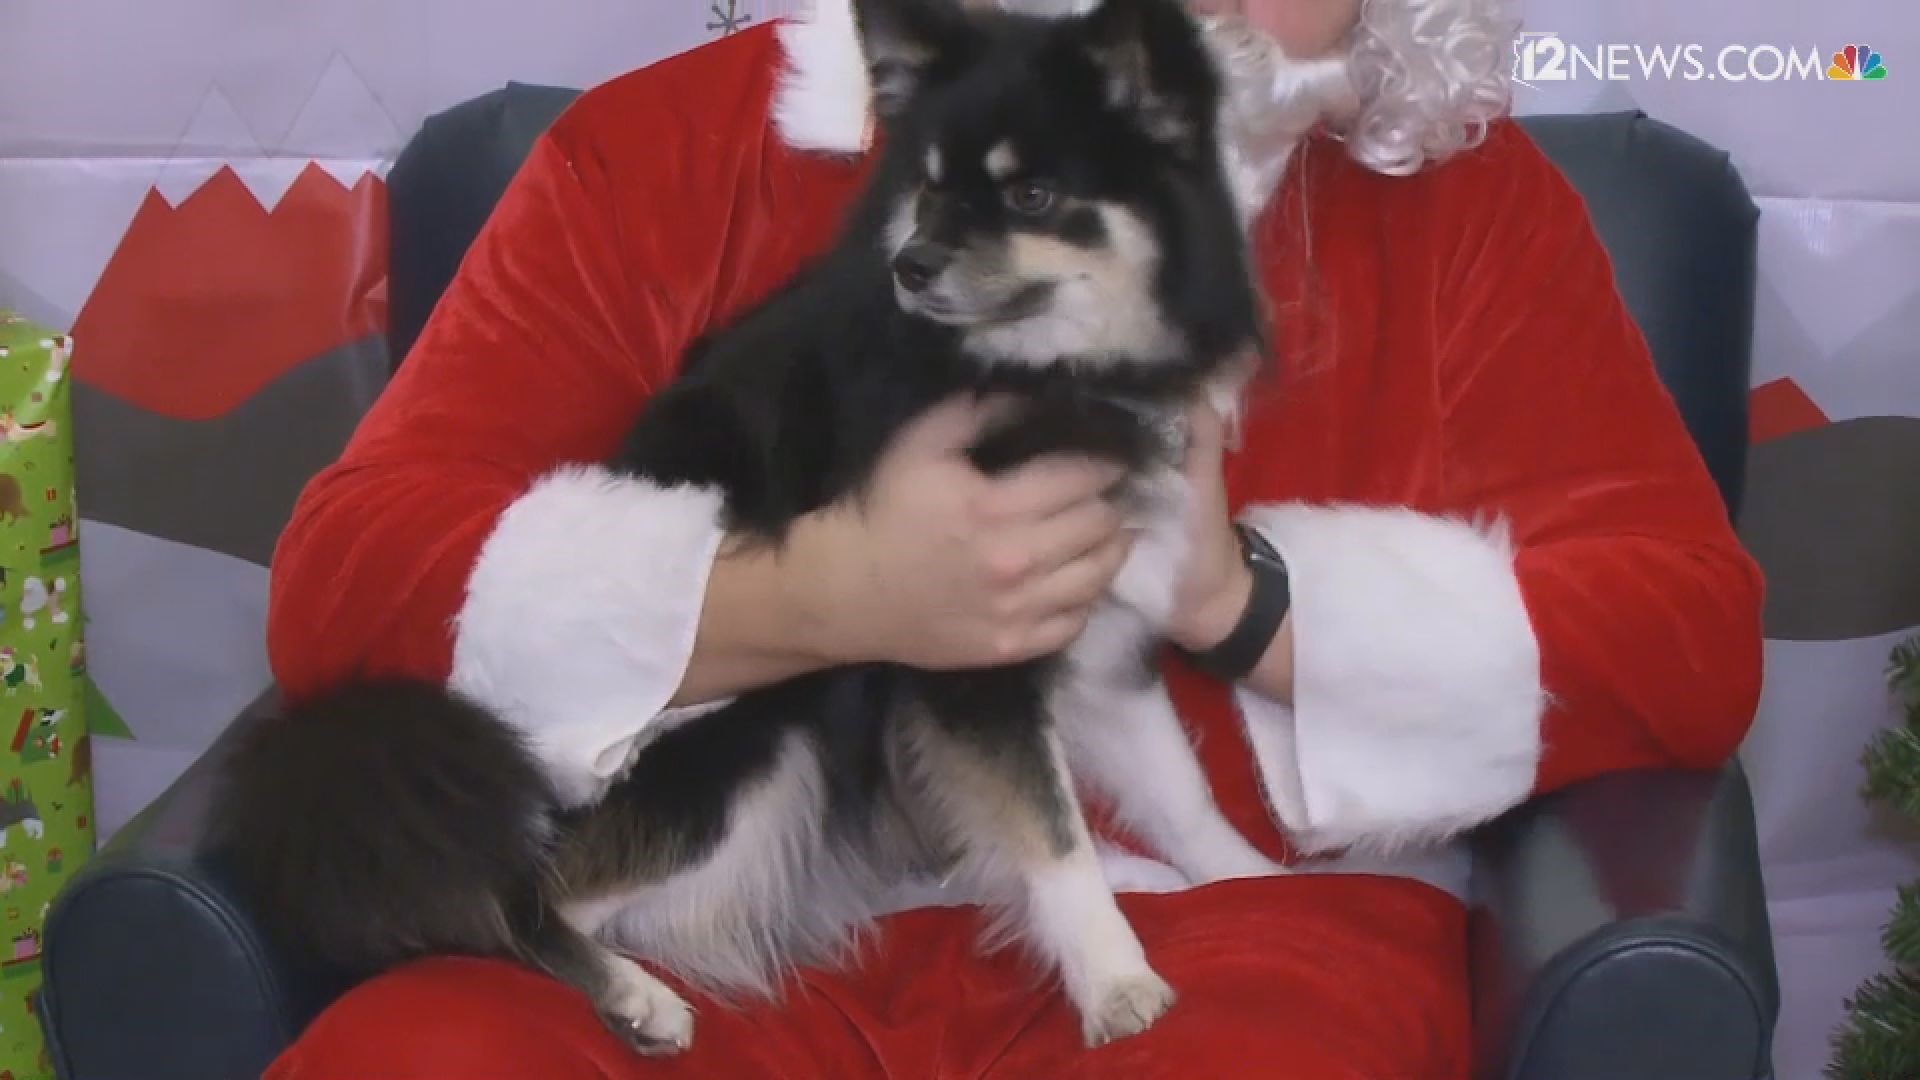 Your pet can get in on the holiday fun by posing for a photo with Santa this weekend.